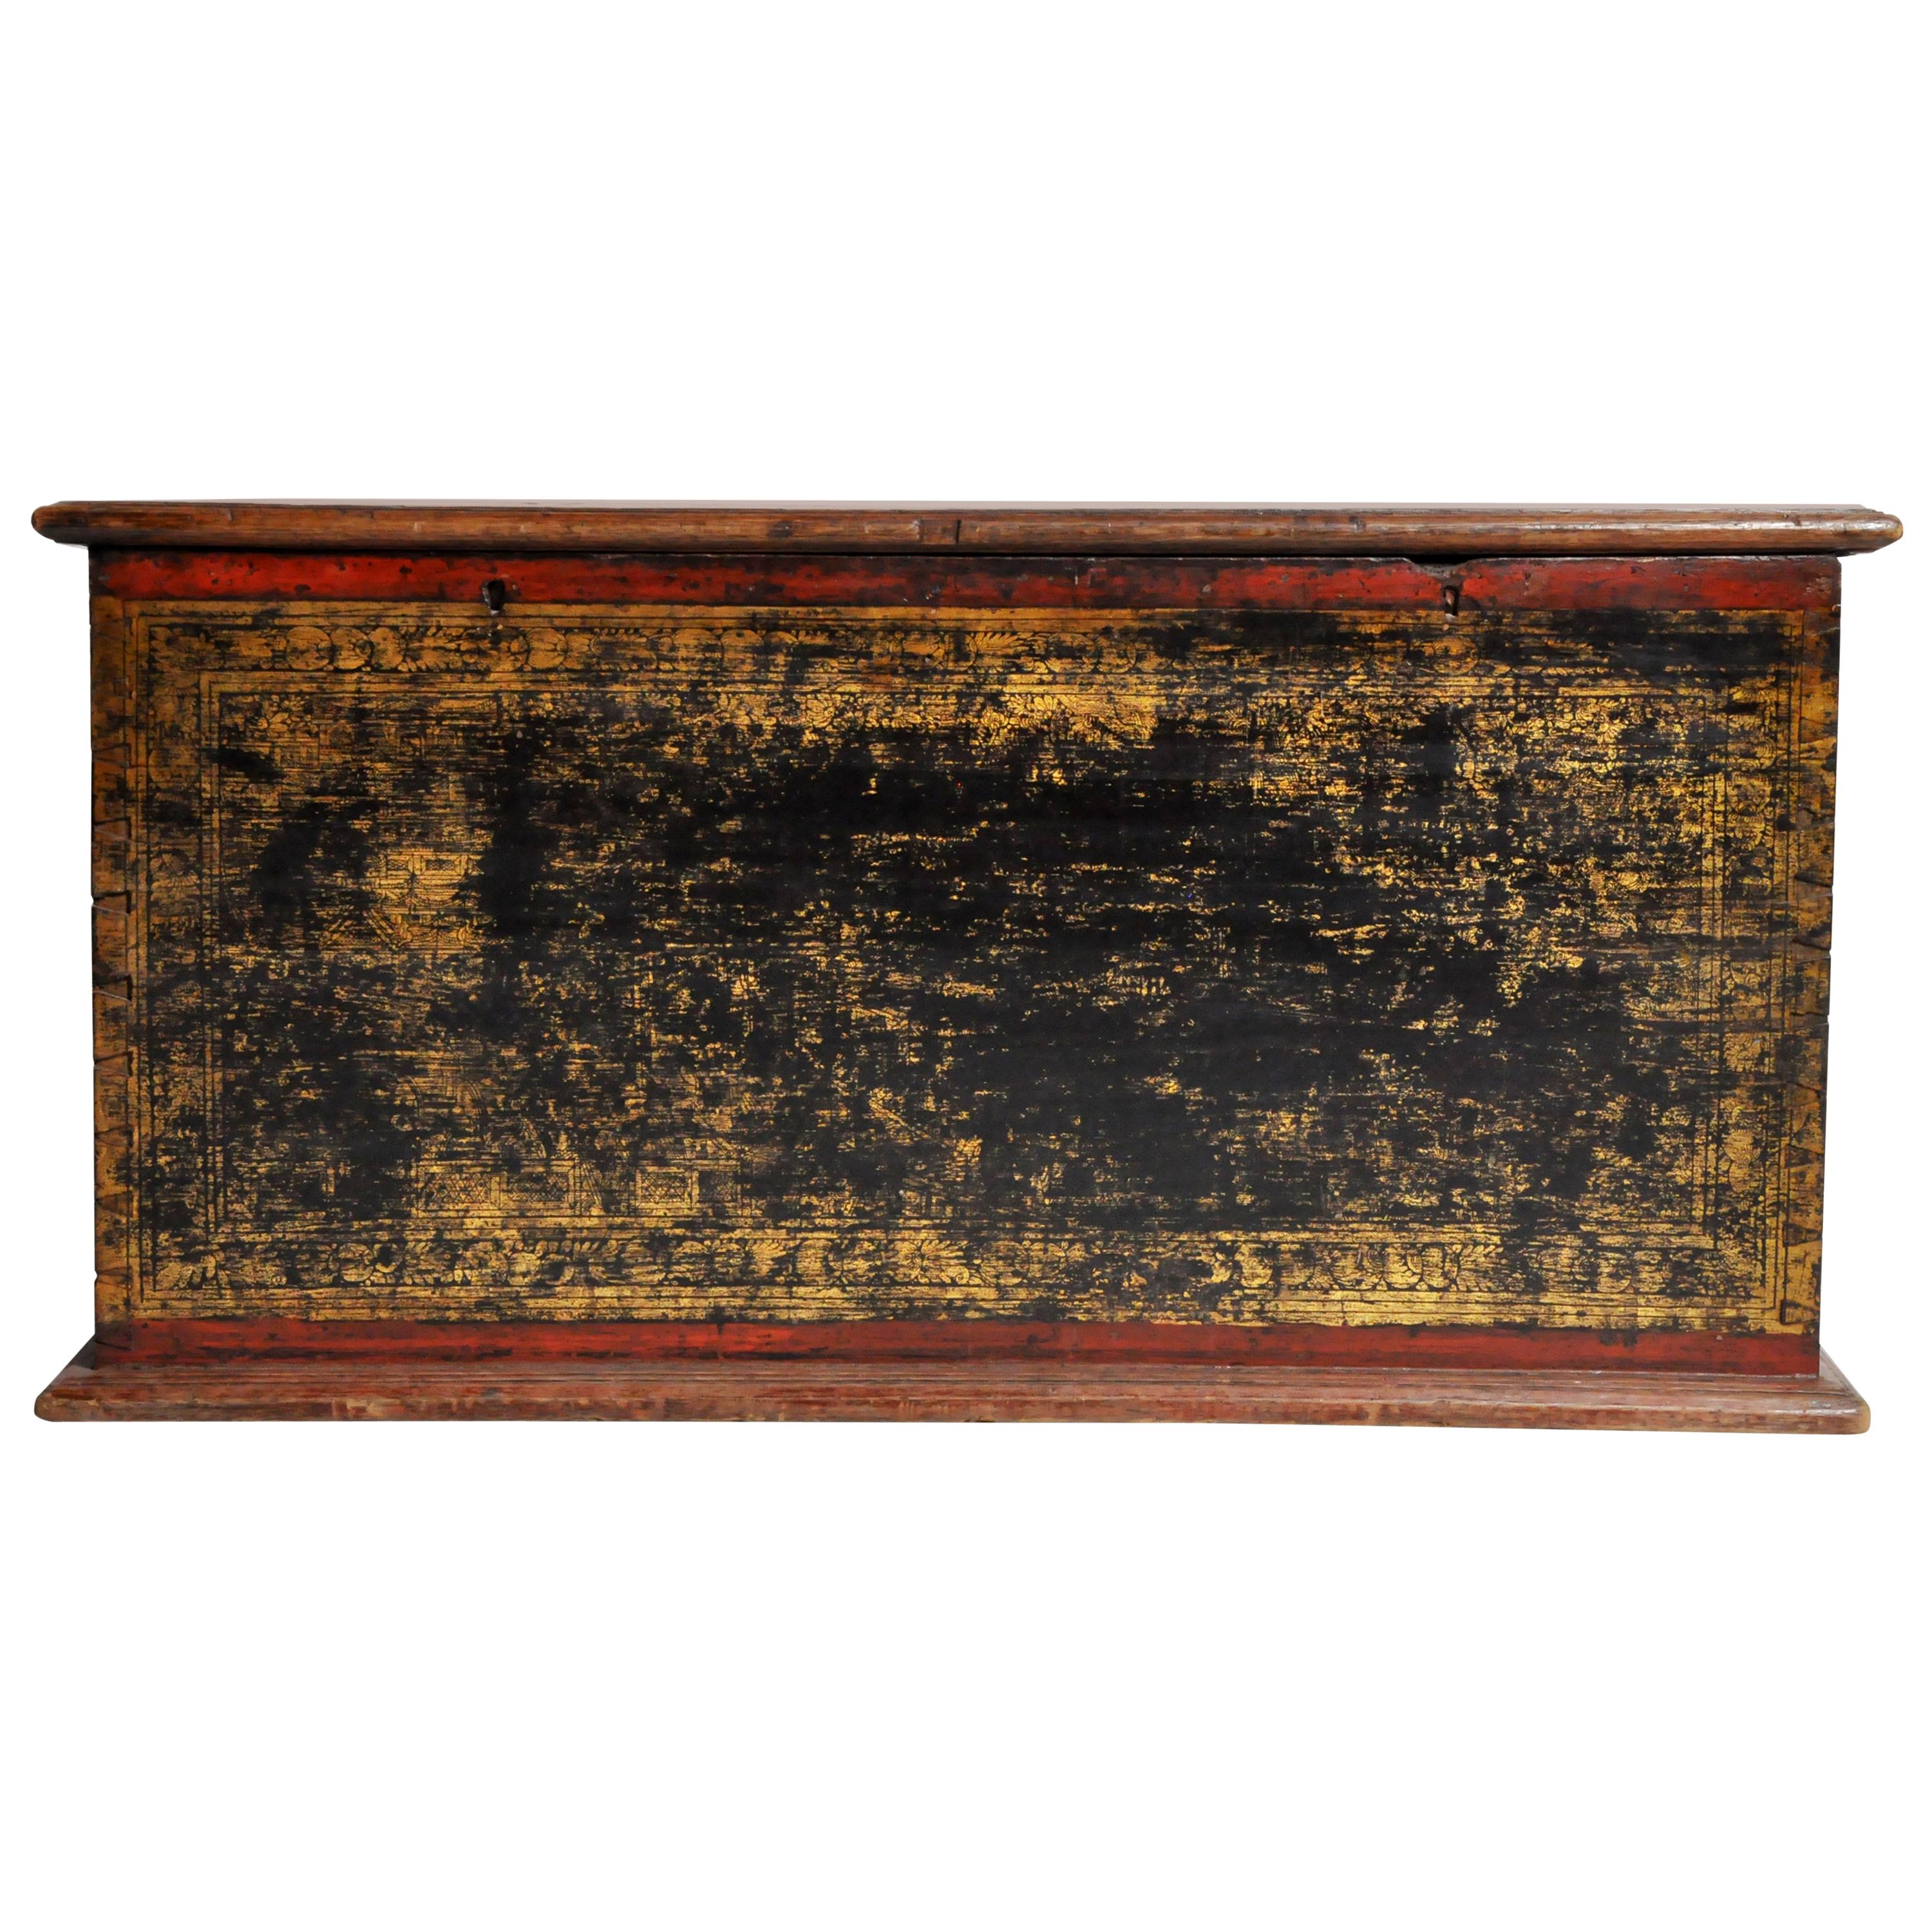 Burmese Manuscript Chest with Red Cinnabar Lacquer and Gold Leaf